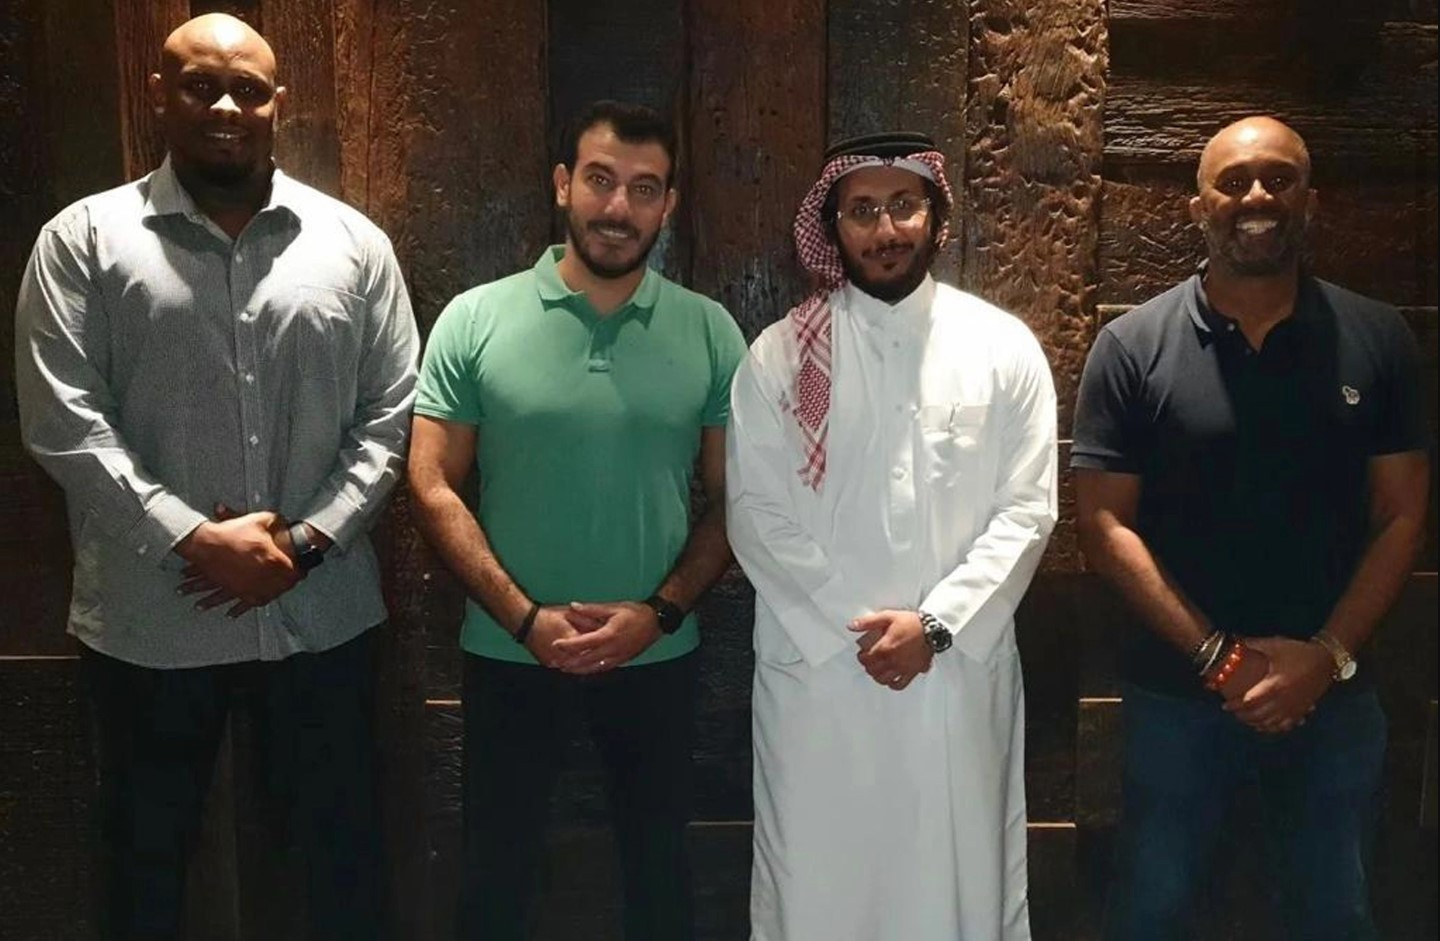 IMMAF President travels to Qatar for discussions on sport's development